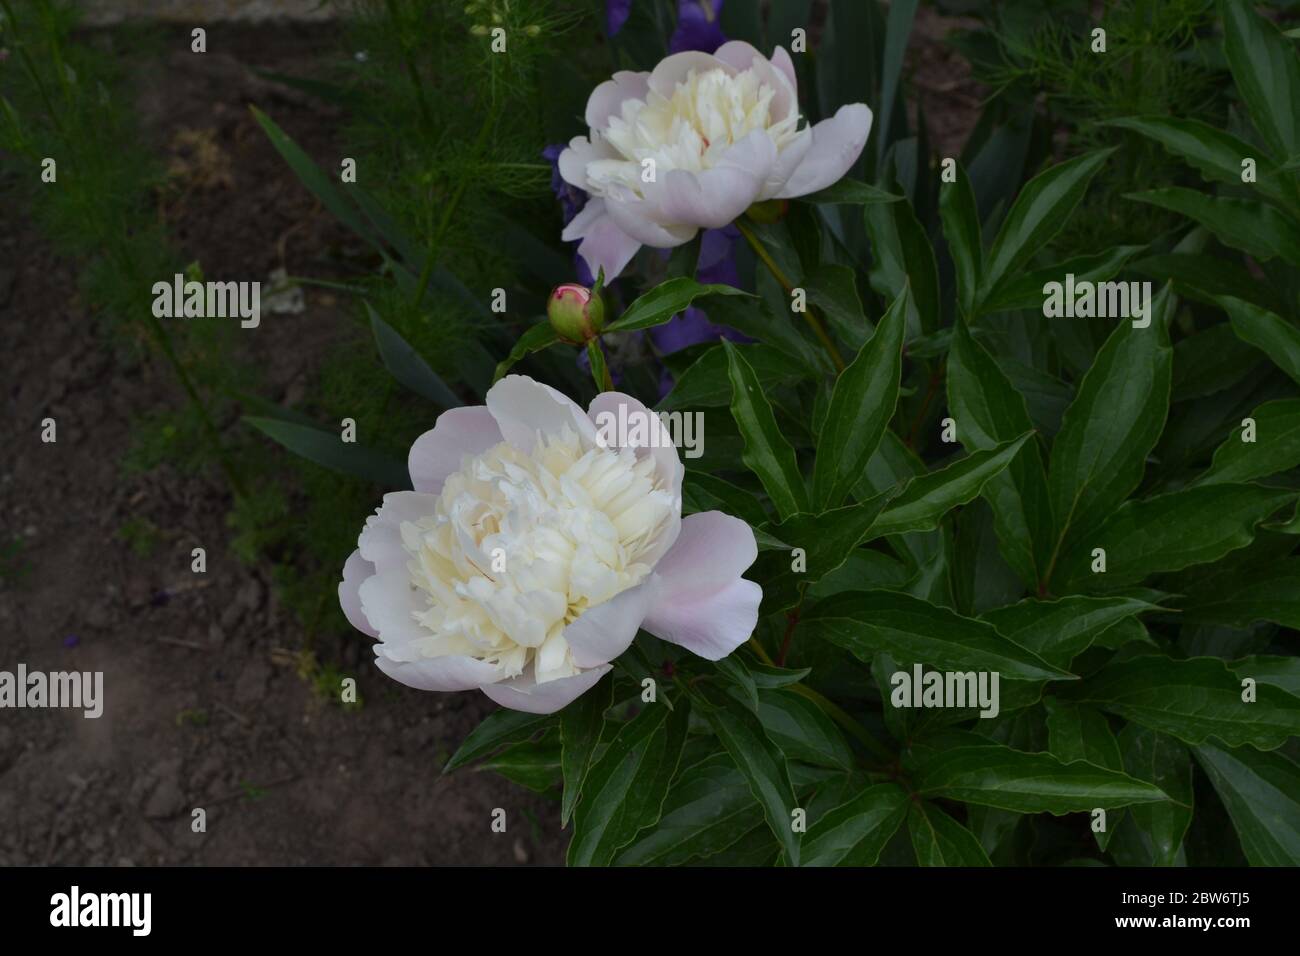 Home garden, flower bed. Gardening. House, field, farm, village. Green leaves, bushes. Flower Peony. Paeonia, herbaceous perennials and deciduous shru Stock Photo